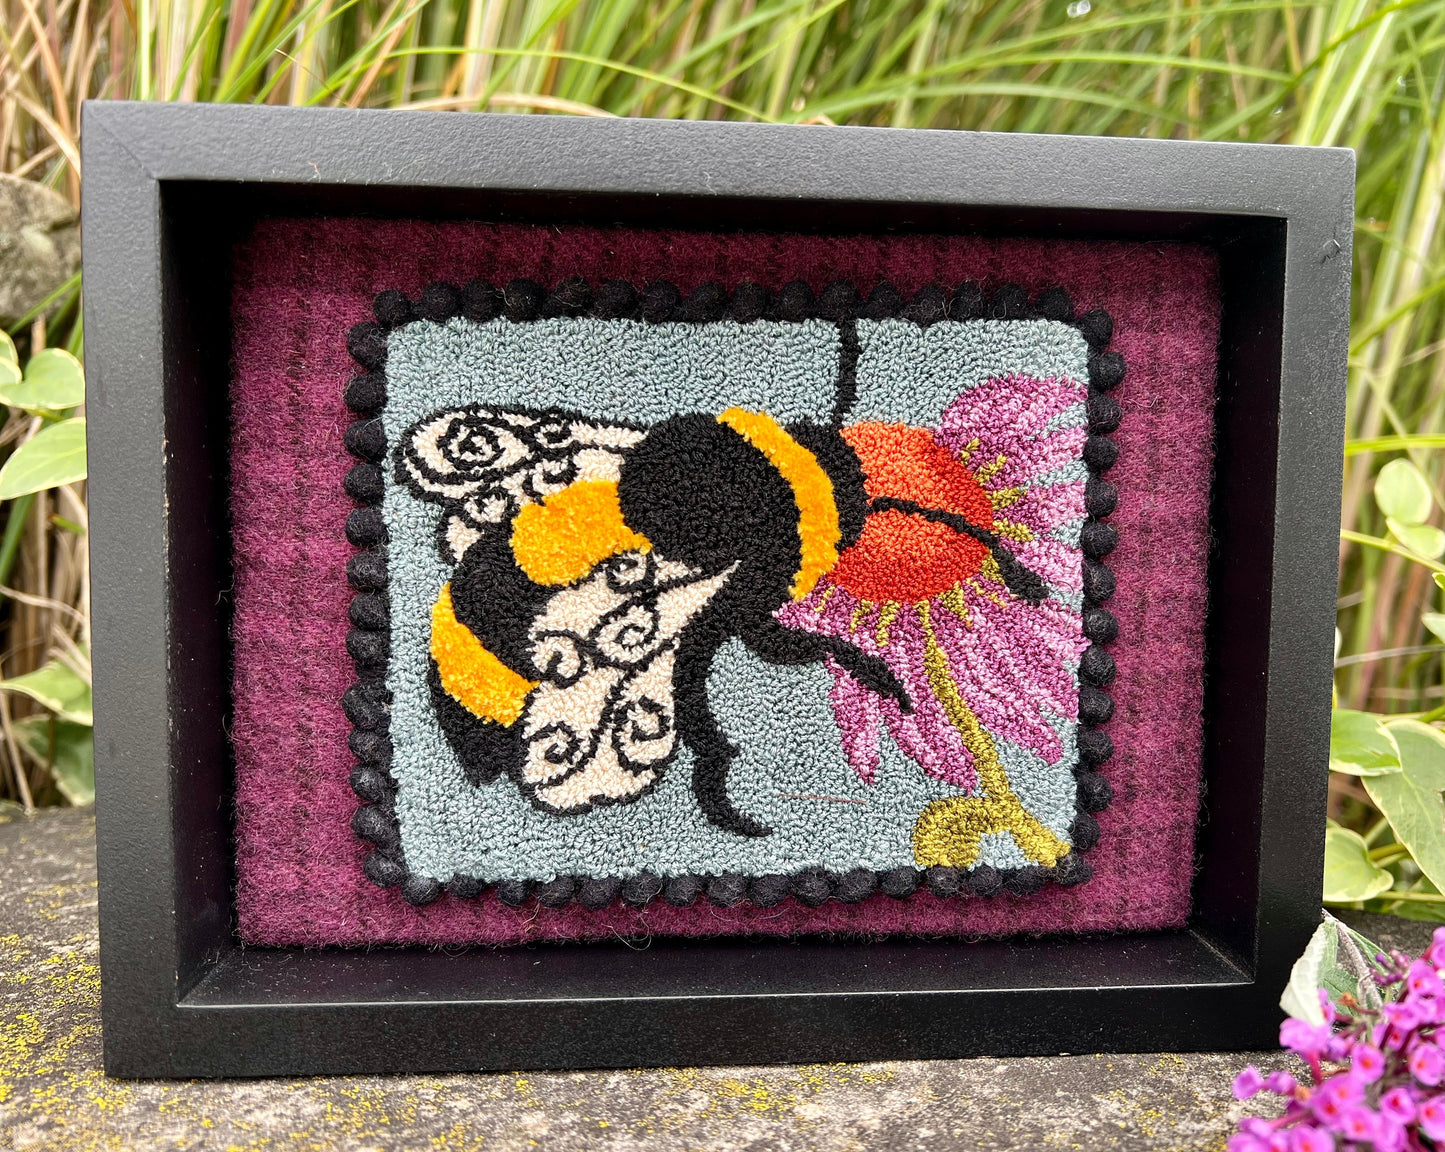 A Bee's Kiss- Needle Punch Pattern by Orphaned Wool, Copyright © 2023 Kelly Kanyok. This pattern is available as a Printed on Cloth pattern or Paper Pattern. The design of a bee kissing a colorful flower.